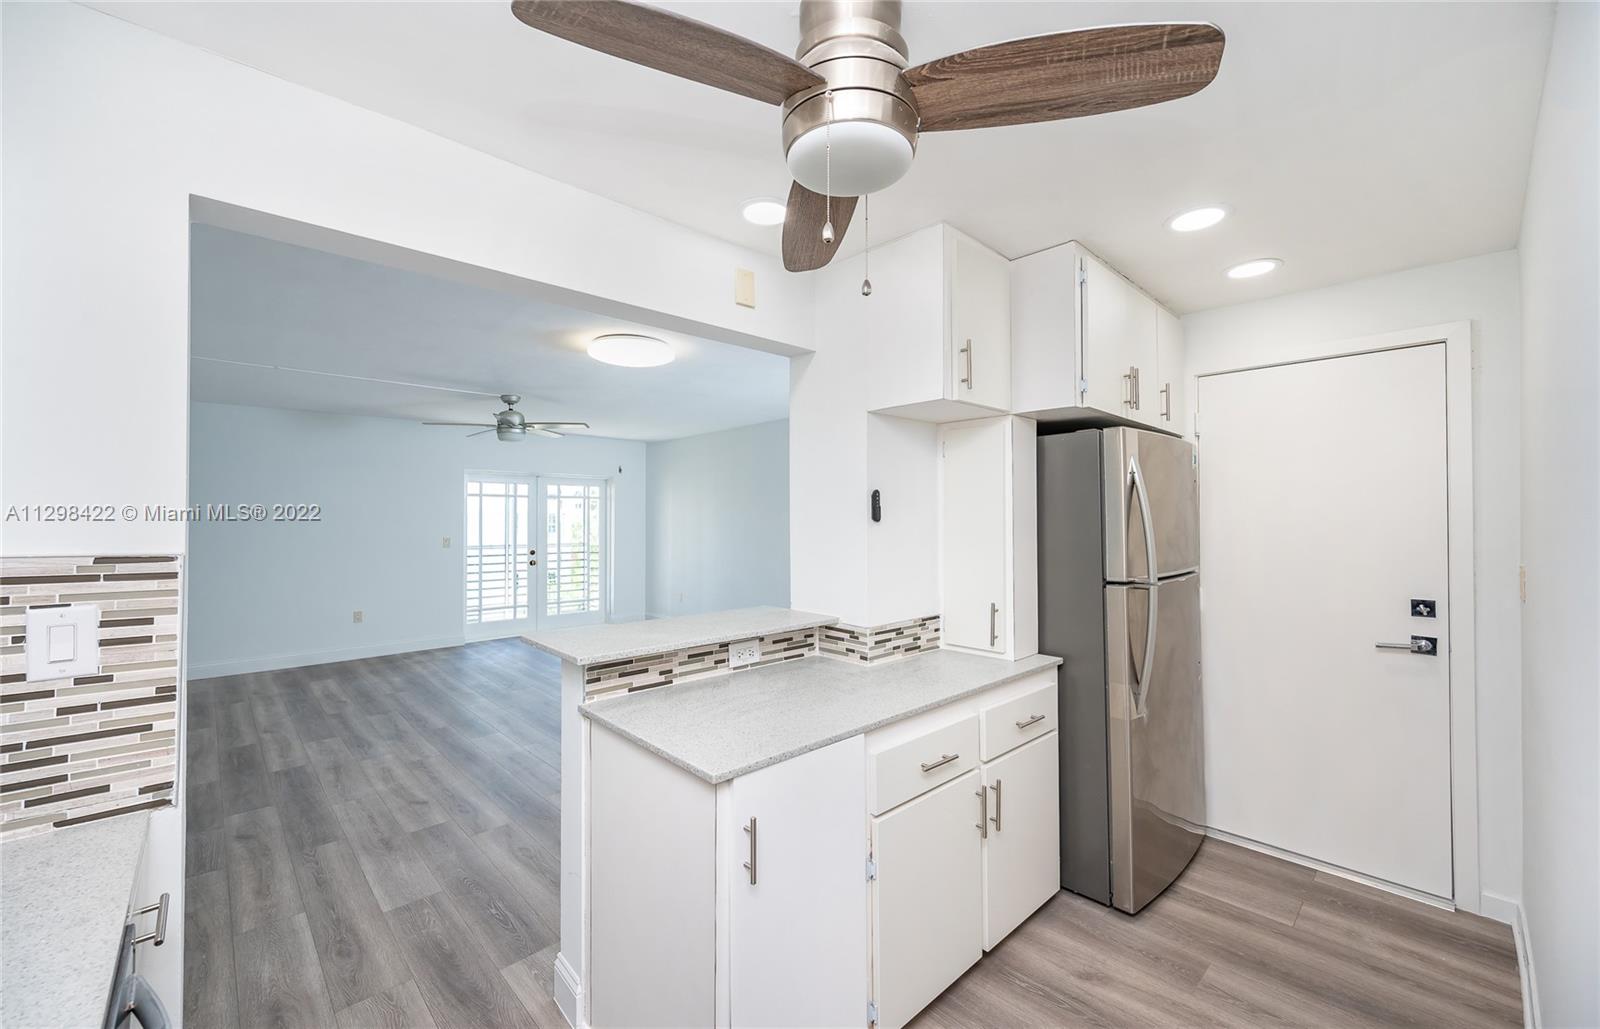 Great 2b/2b apartment. steps aways from the beach. Oversized corner unit with natural light, new floors (living area), dishwasher, water heater ad both bathrooms recently remodeled.
Quiet street in small building with easy access in and out.